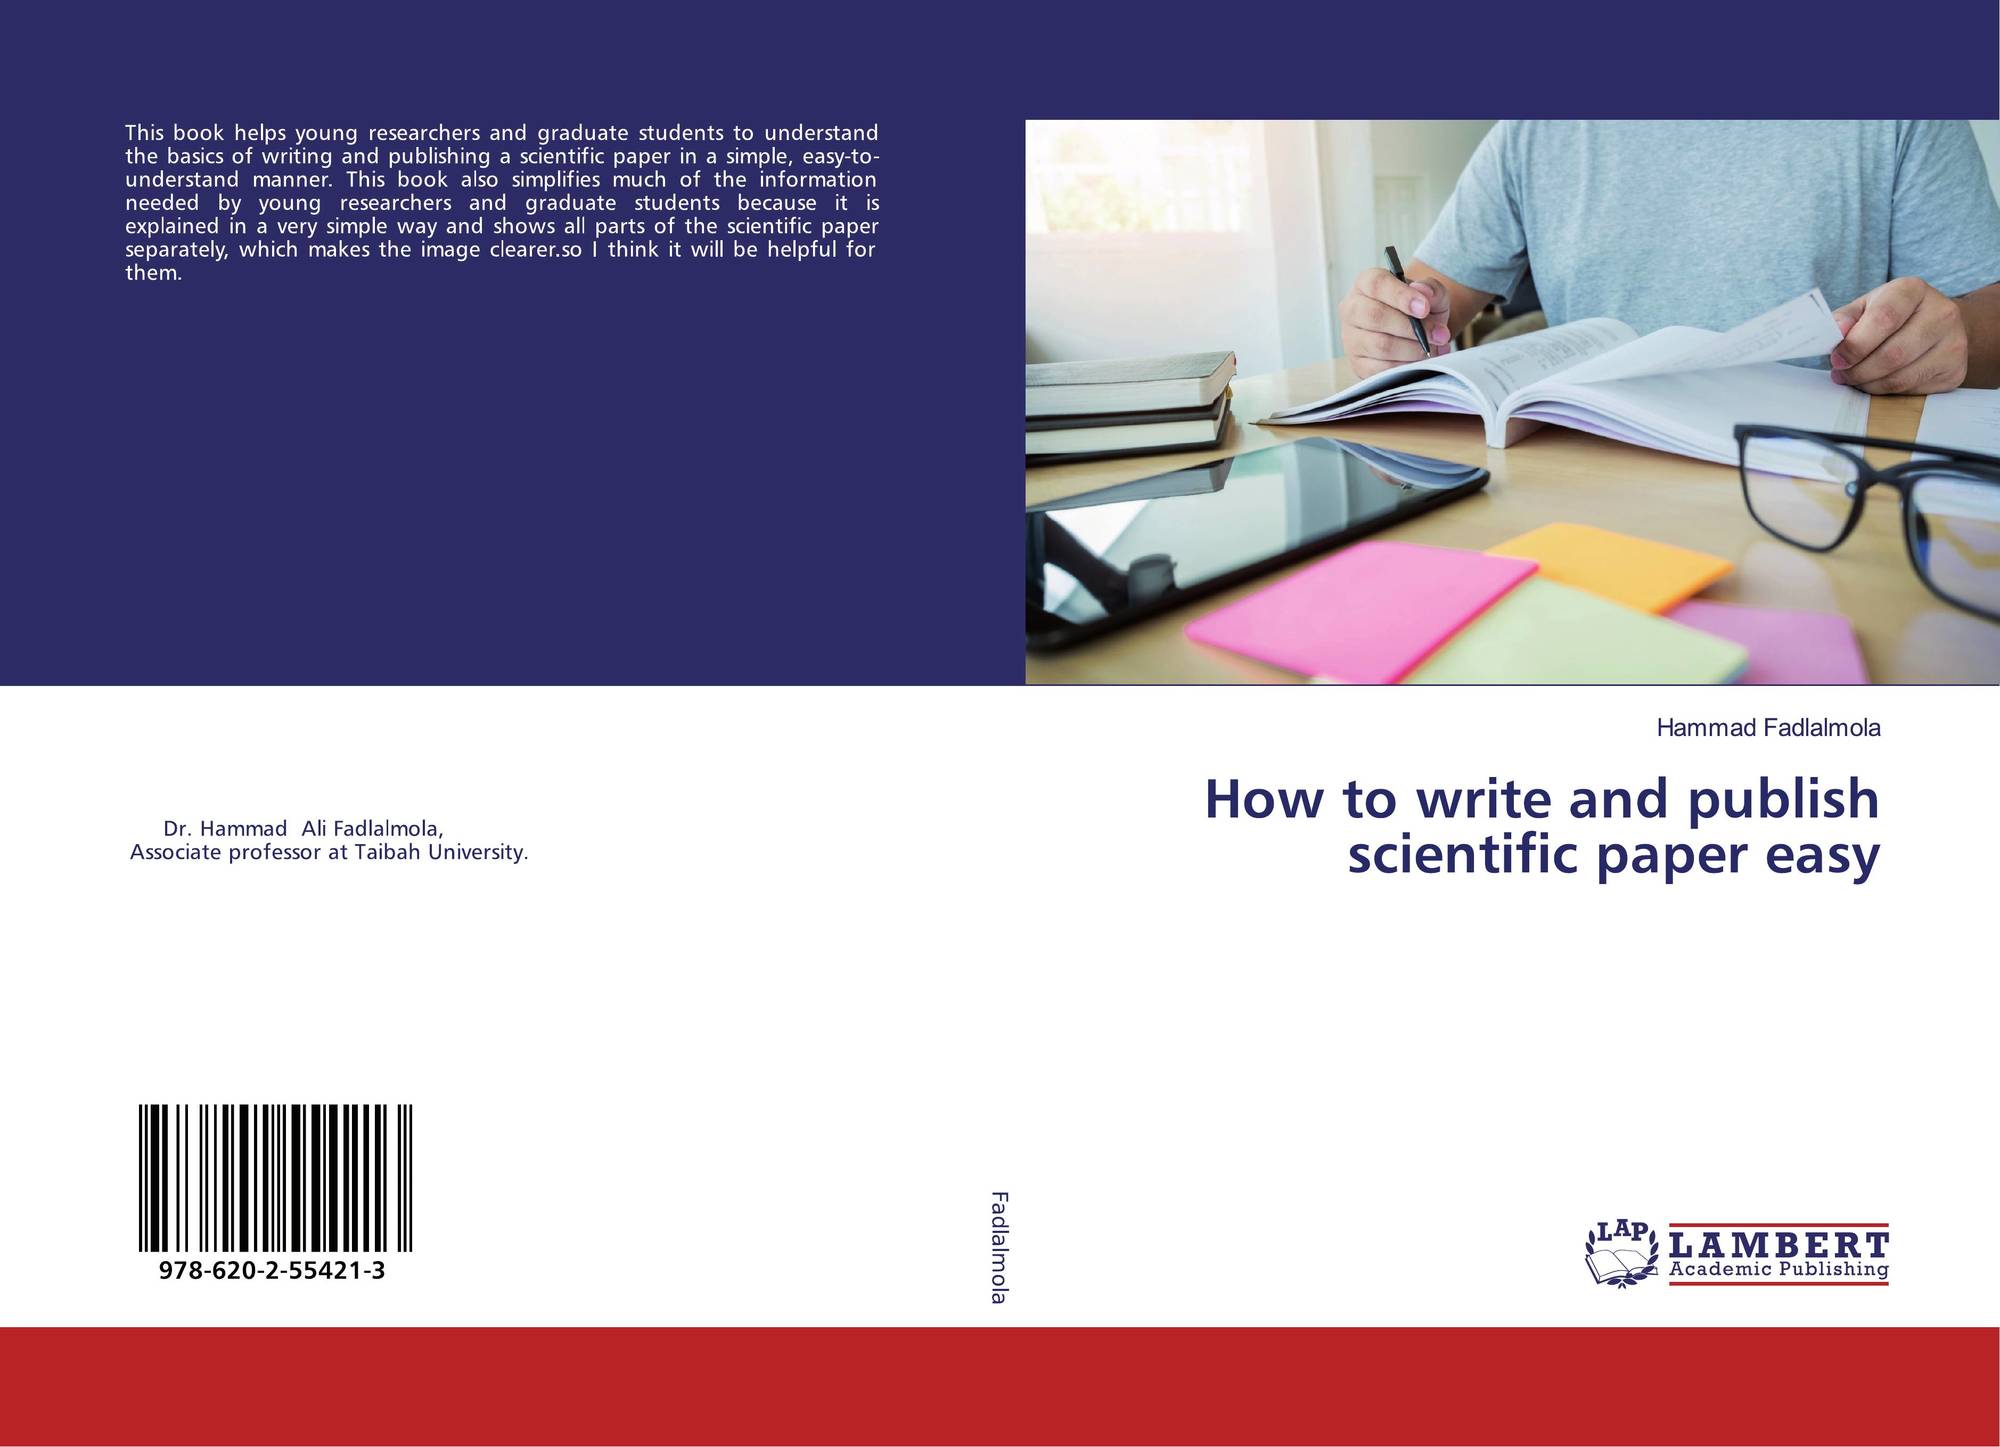 How to write and publish scientific paper easy, 266-266-26-554261-26